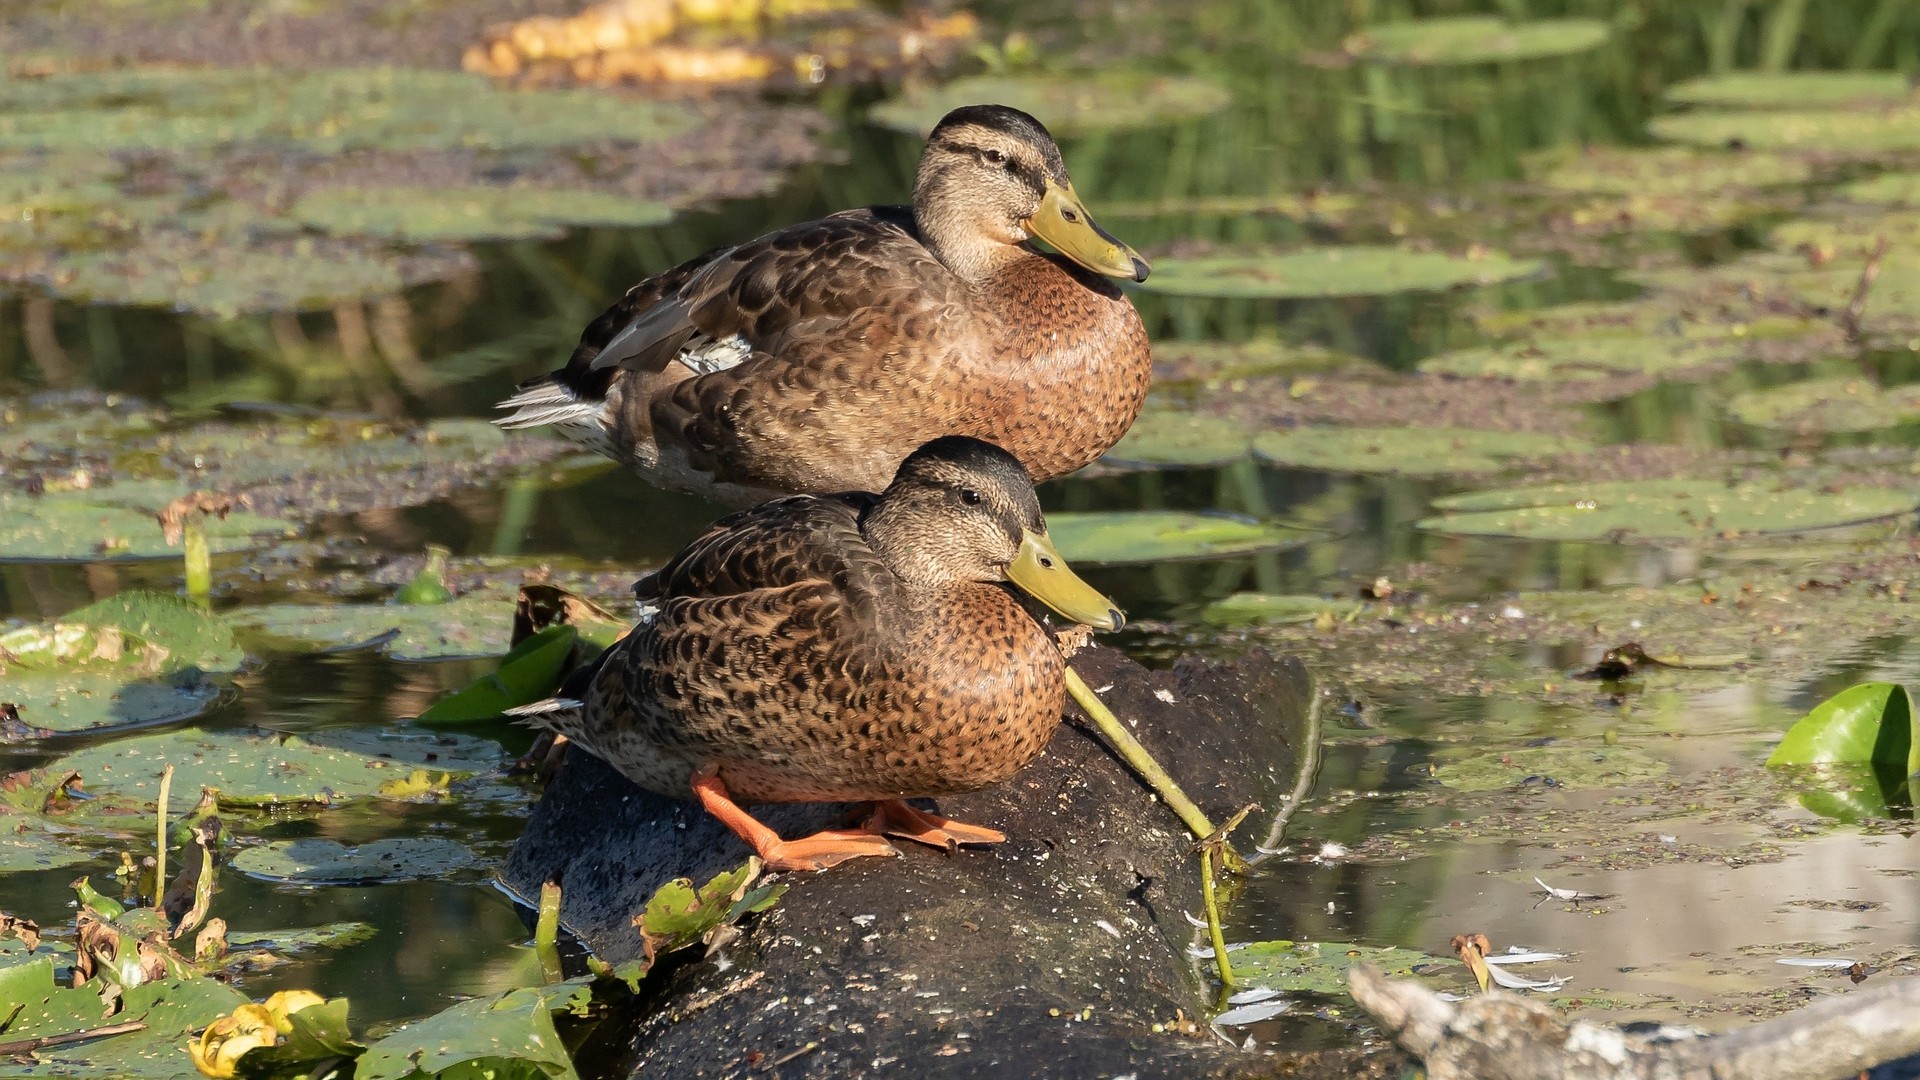 Two mallard ducks on a pond with lily pads